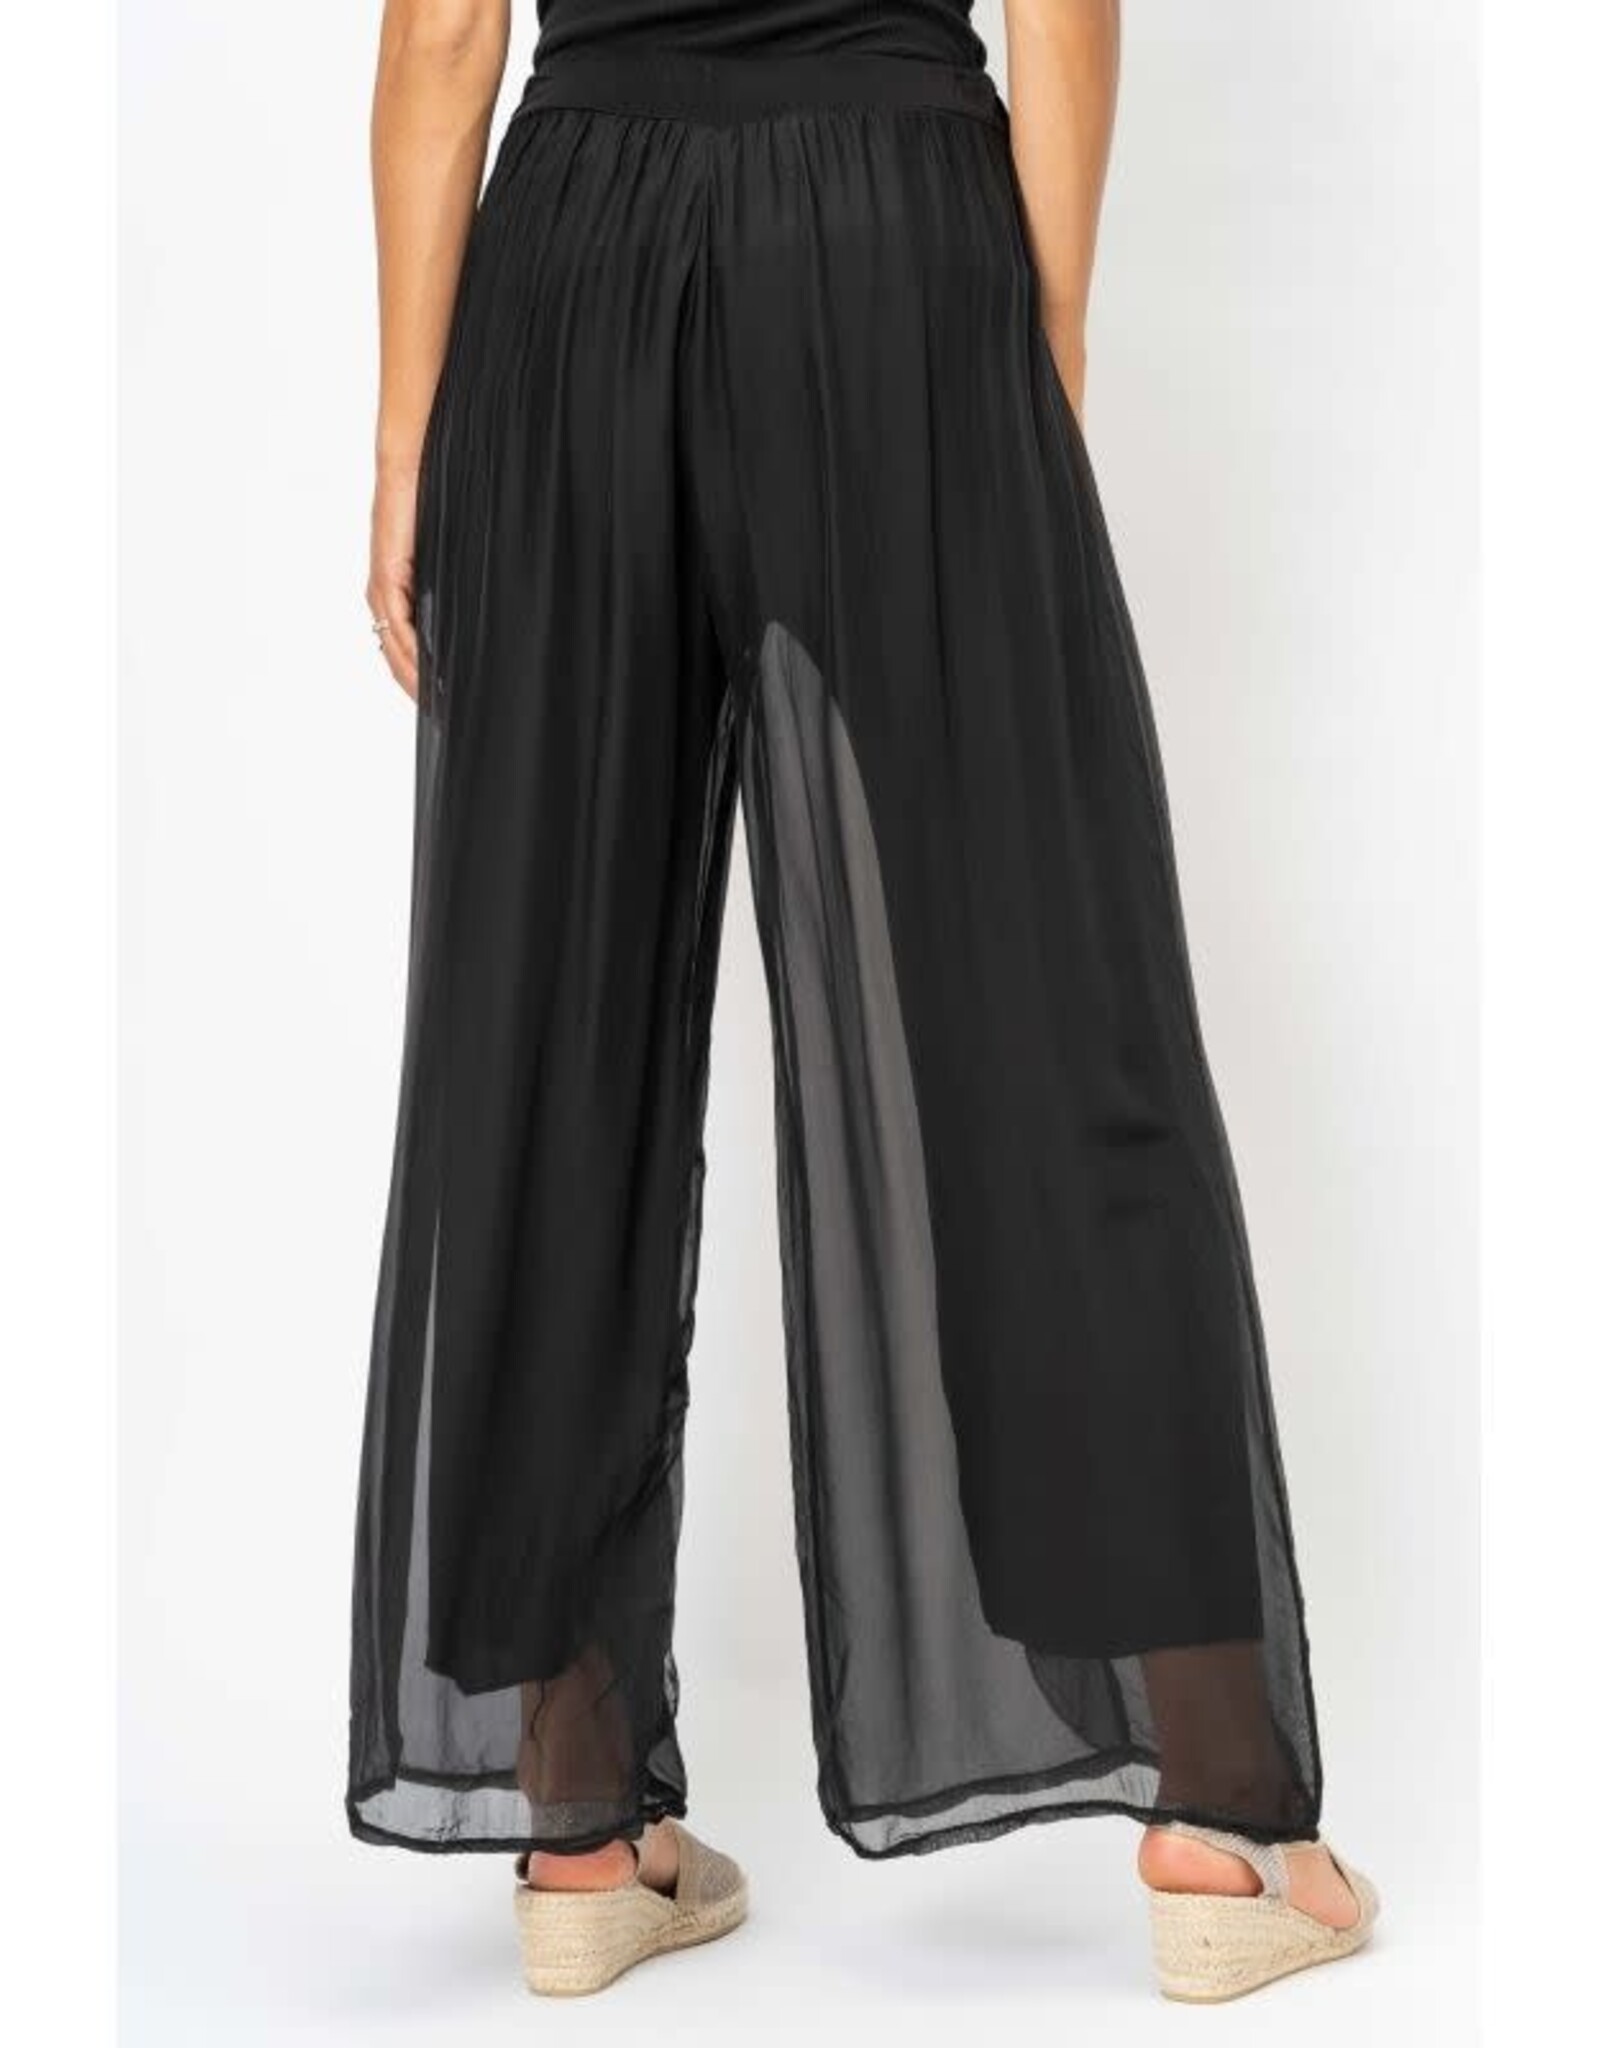 - Black Silk Pant Ruffle Detail on Front